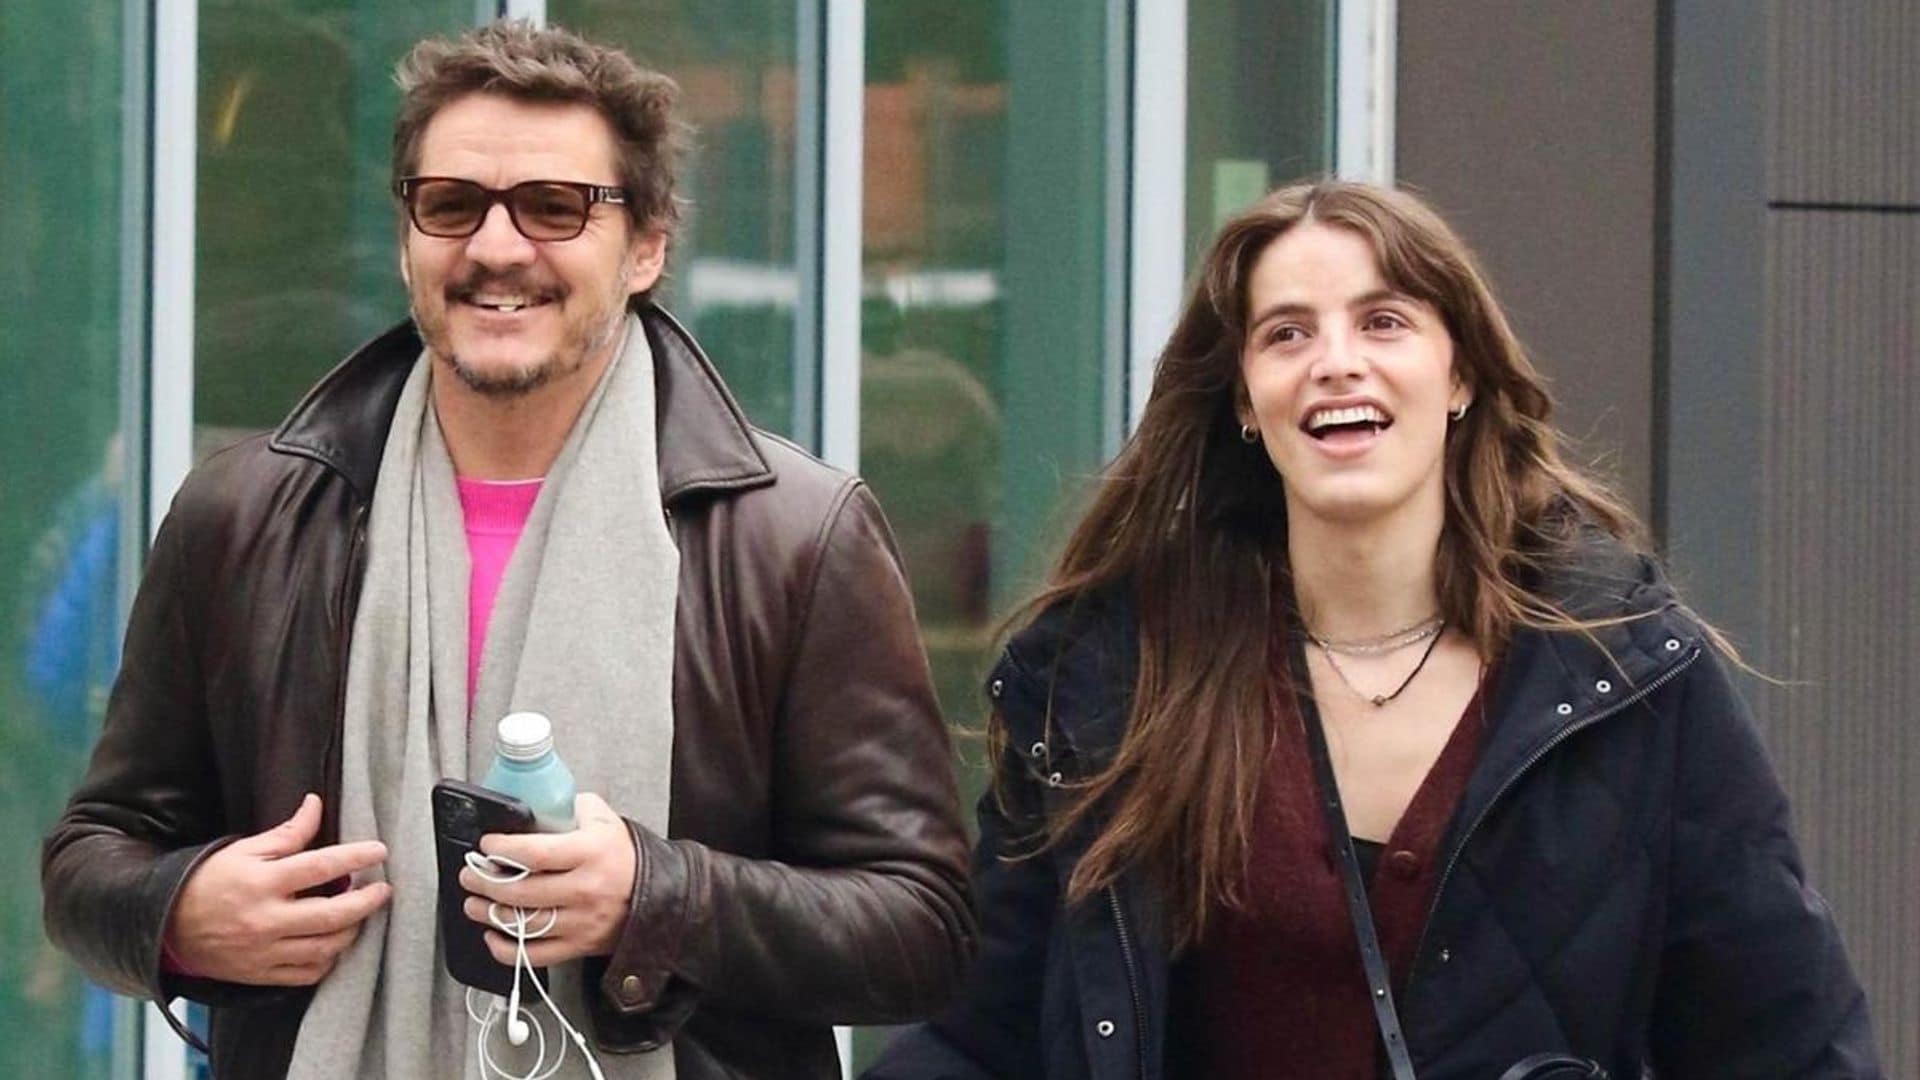 Pedro Pascal takes the NYC train with his sister Lux Pascal to enjoy an off-Broadway show